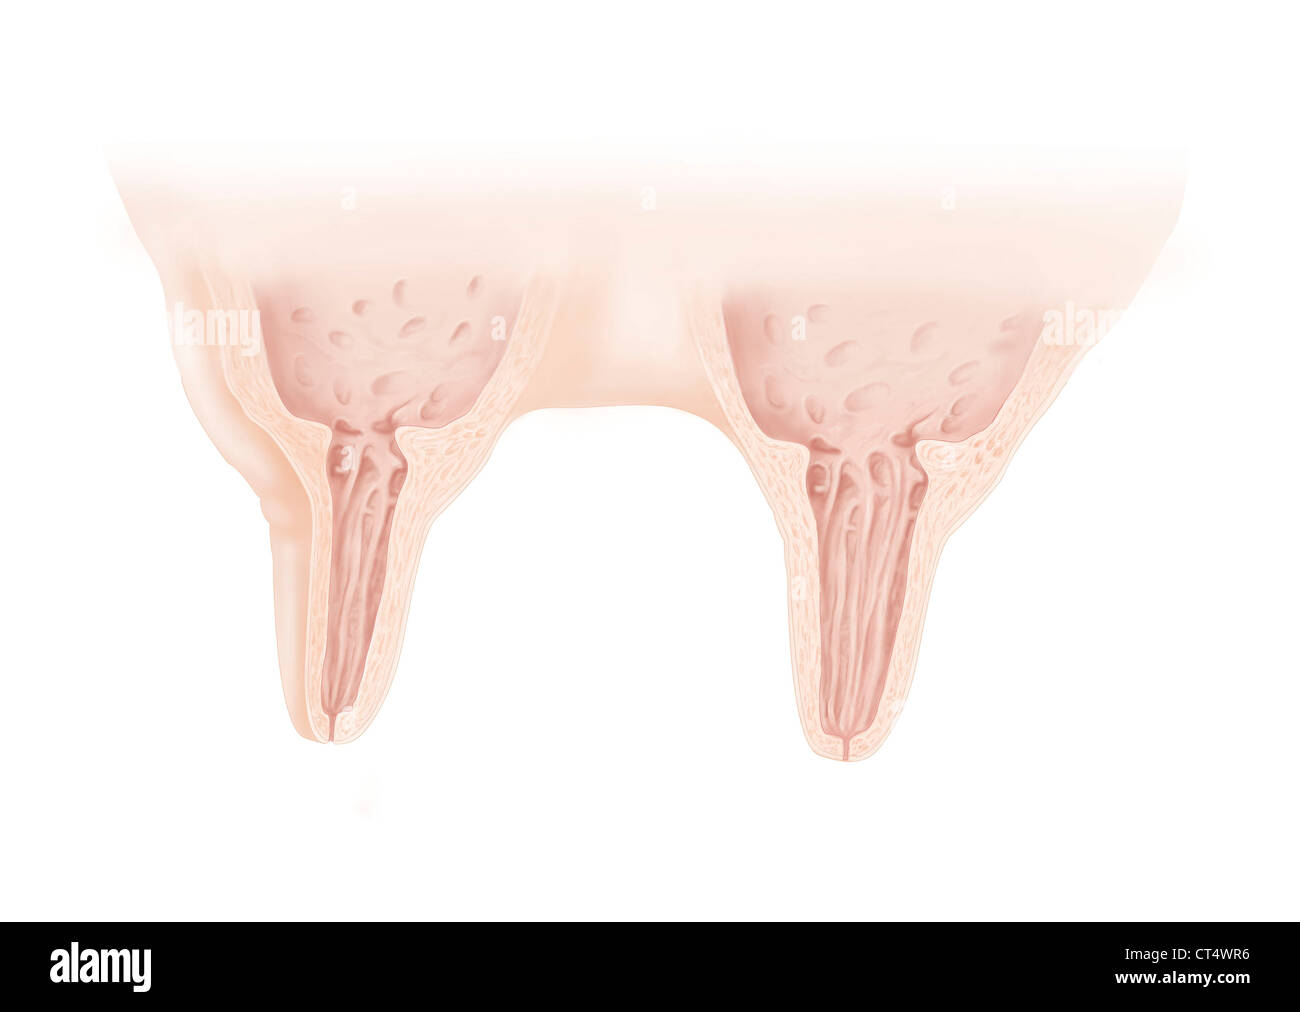 Cow mammary gland, drawing Stock Photo